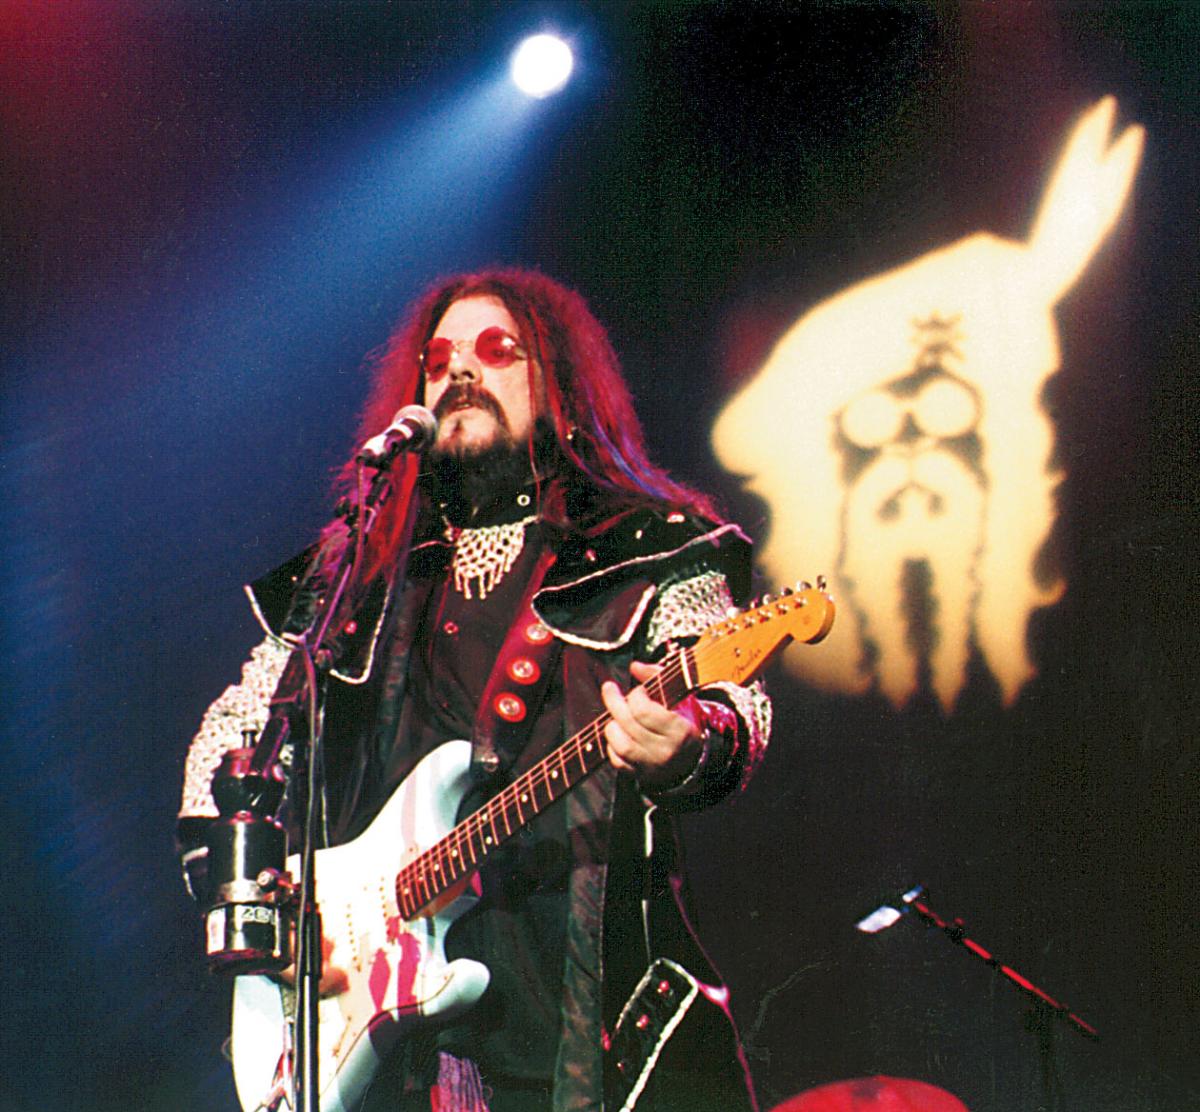 New Theatre in Oxford will welcome Roy Wood (ex Christmas rockers Wizzard) in February